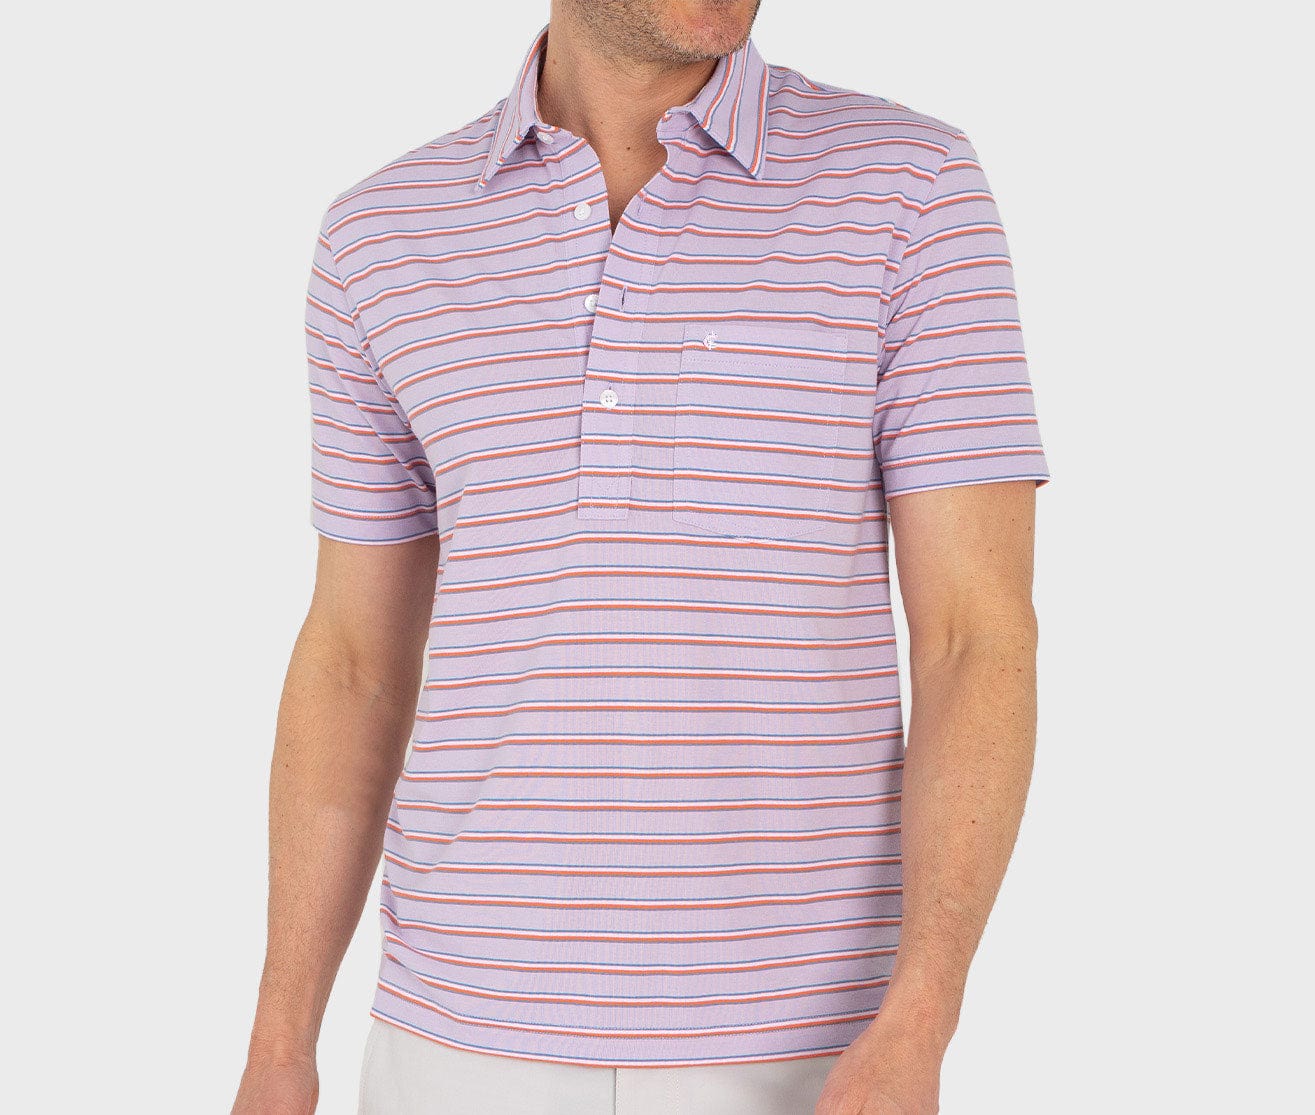 Performance Players Shirt - Martin Stripe - Orchid